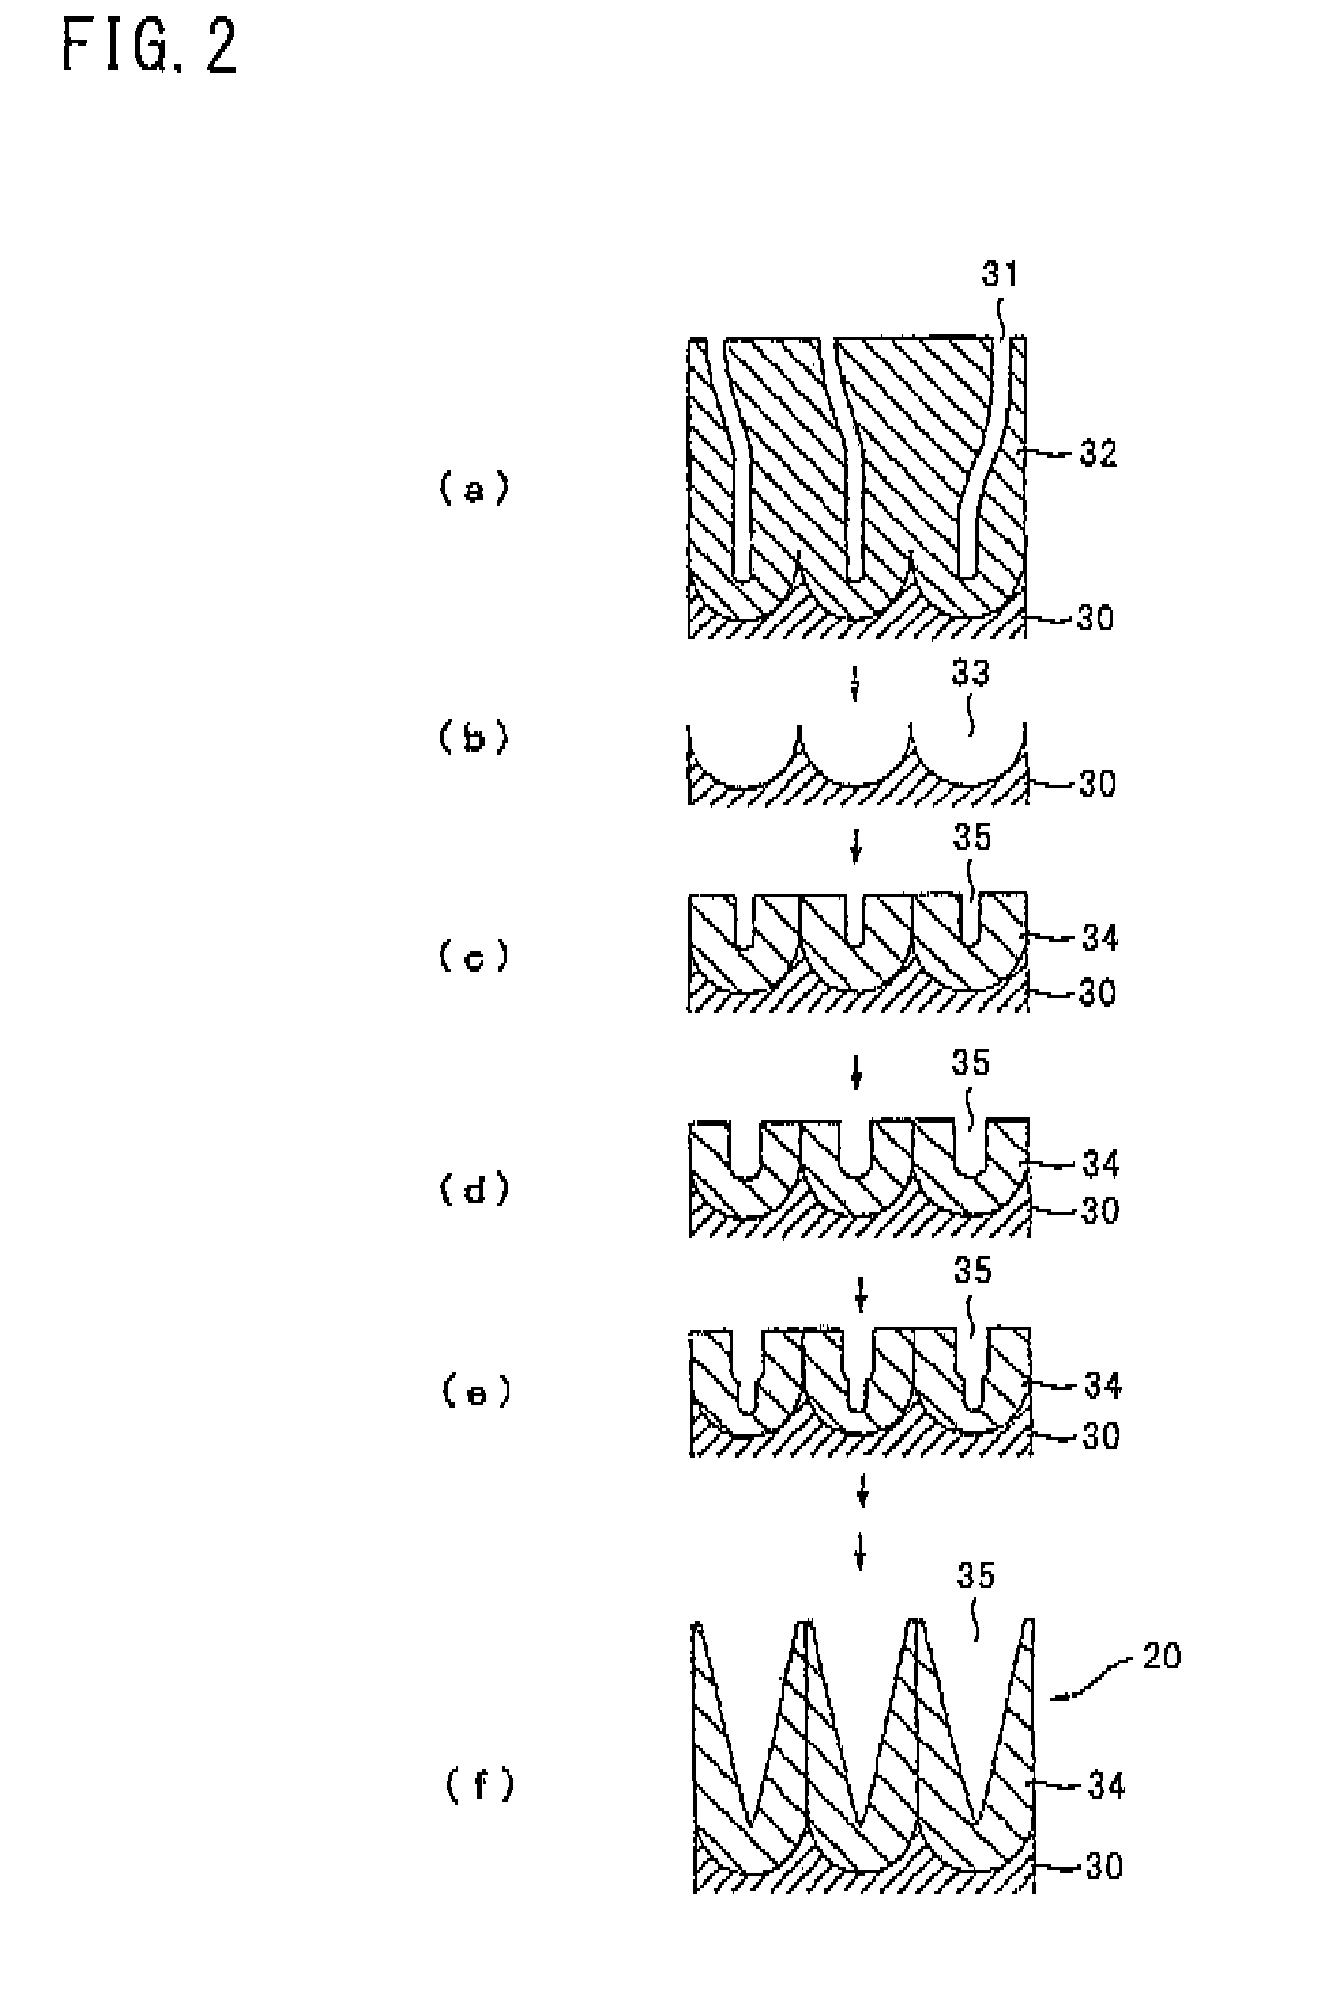 Laminate and method for manufacturing the same